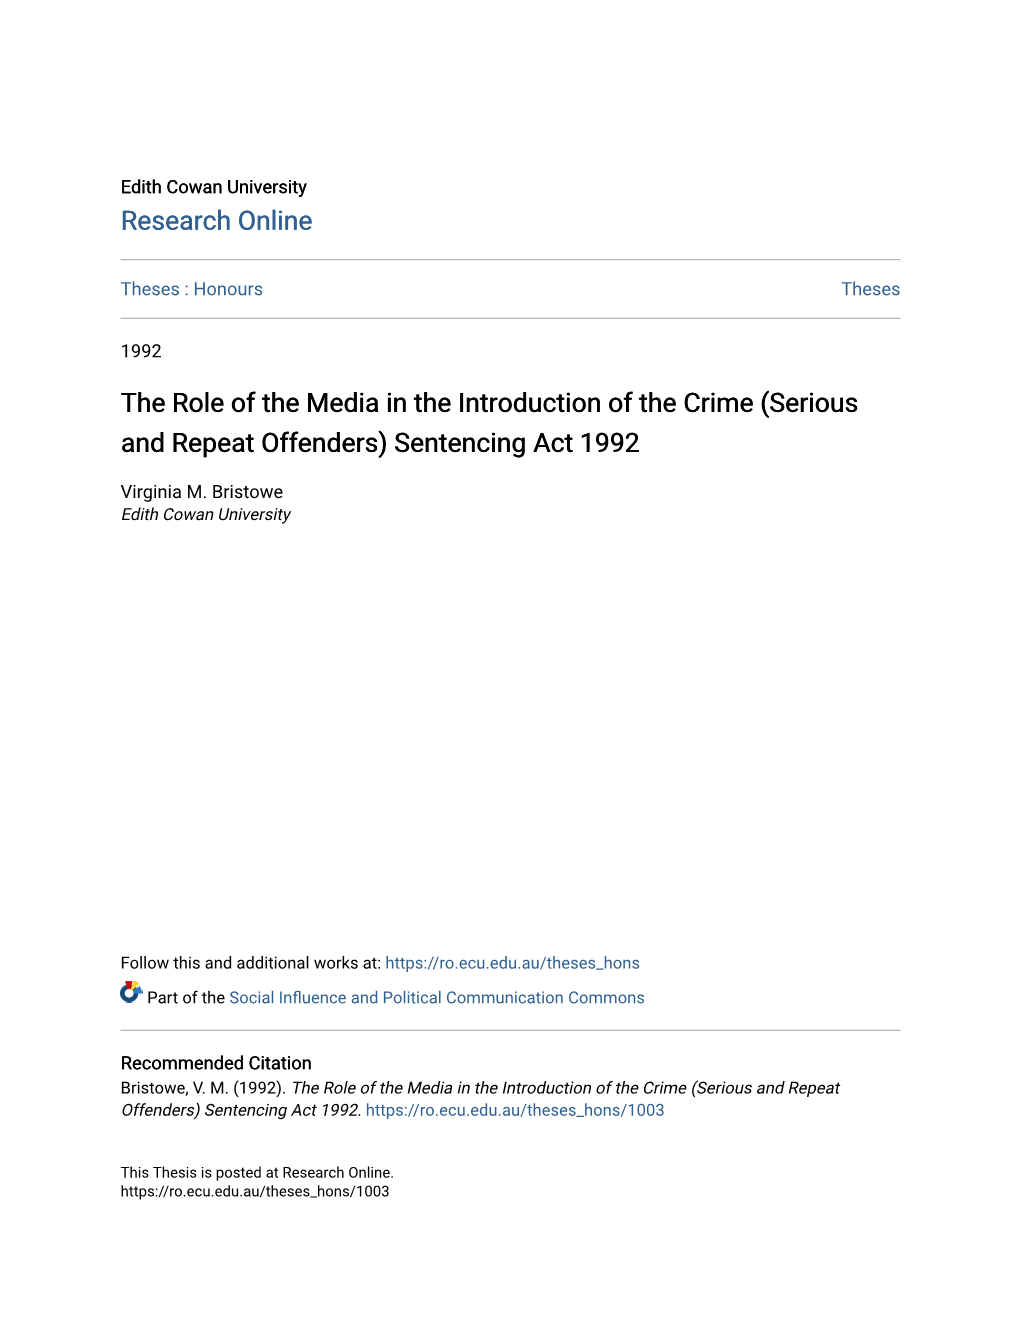 The Role of the Media in the Introduction of the Crime (Serious and Repeat Offenders) Sentencing Act 1992